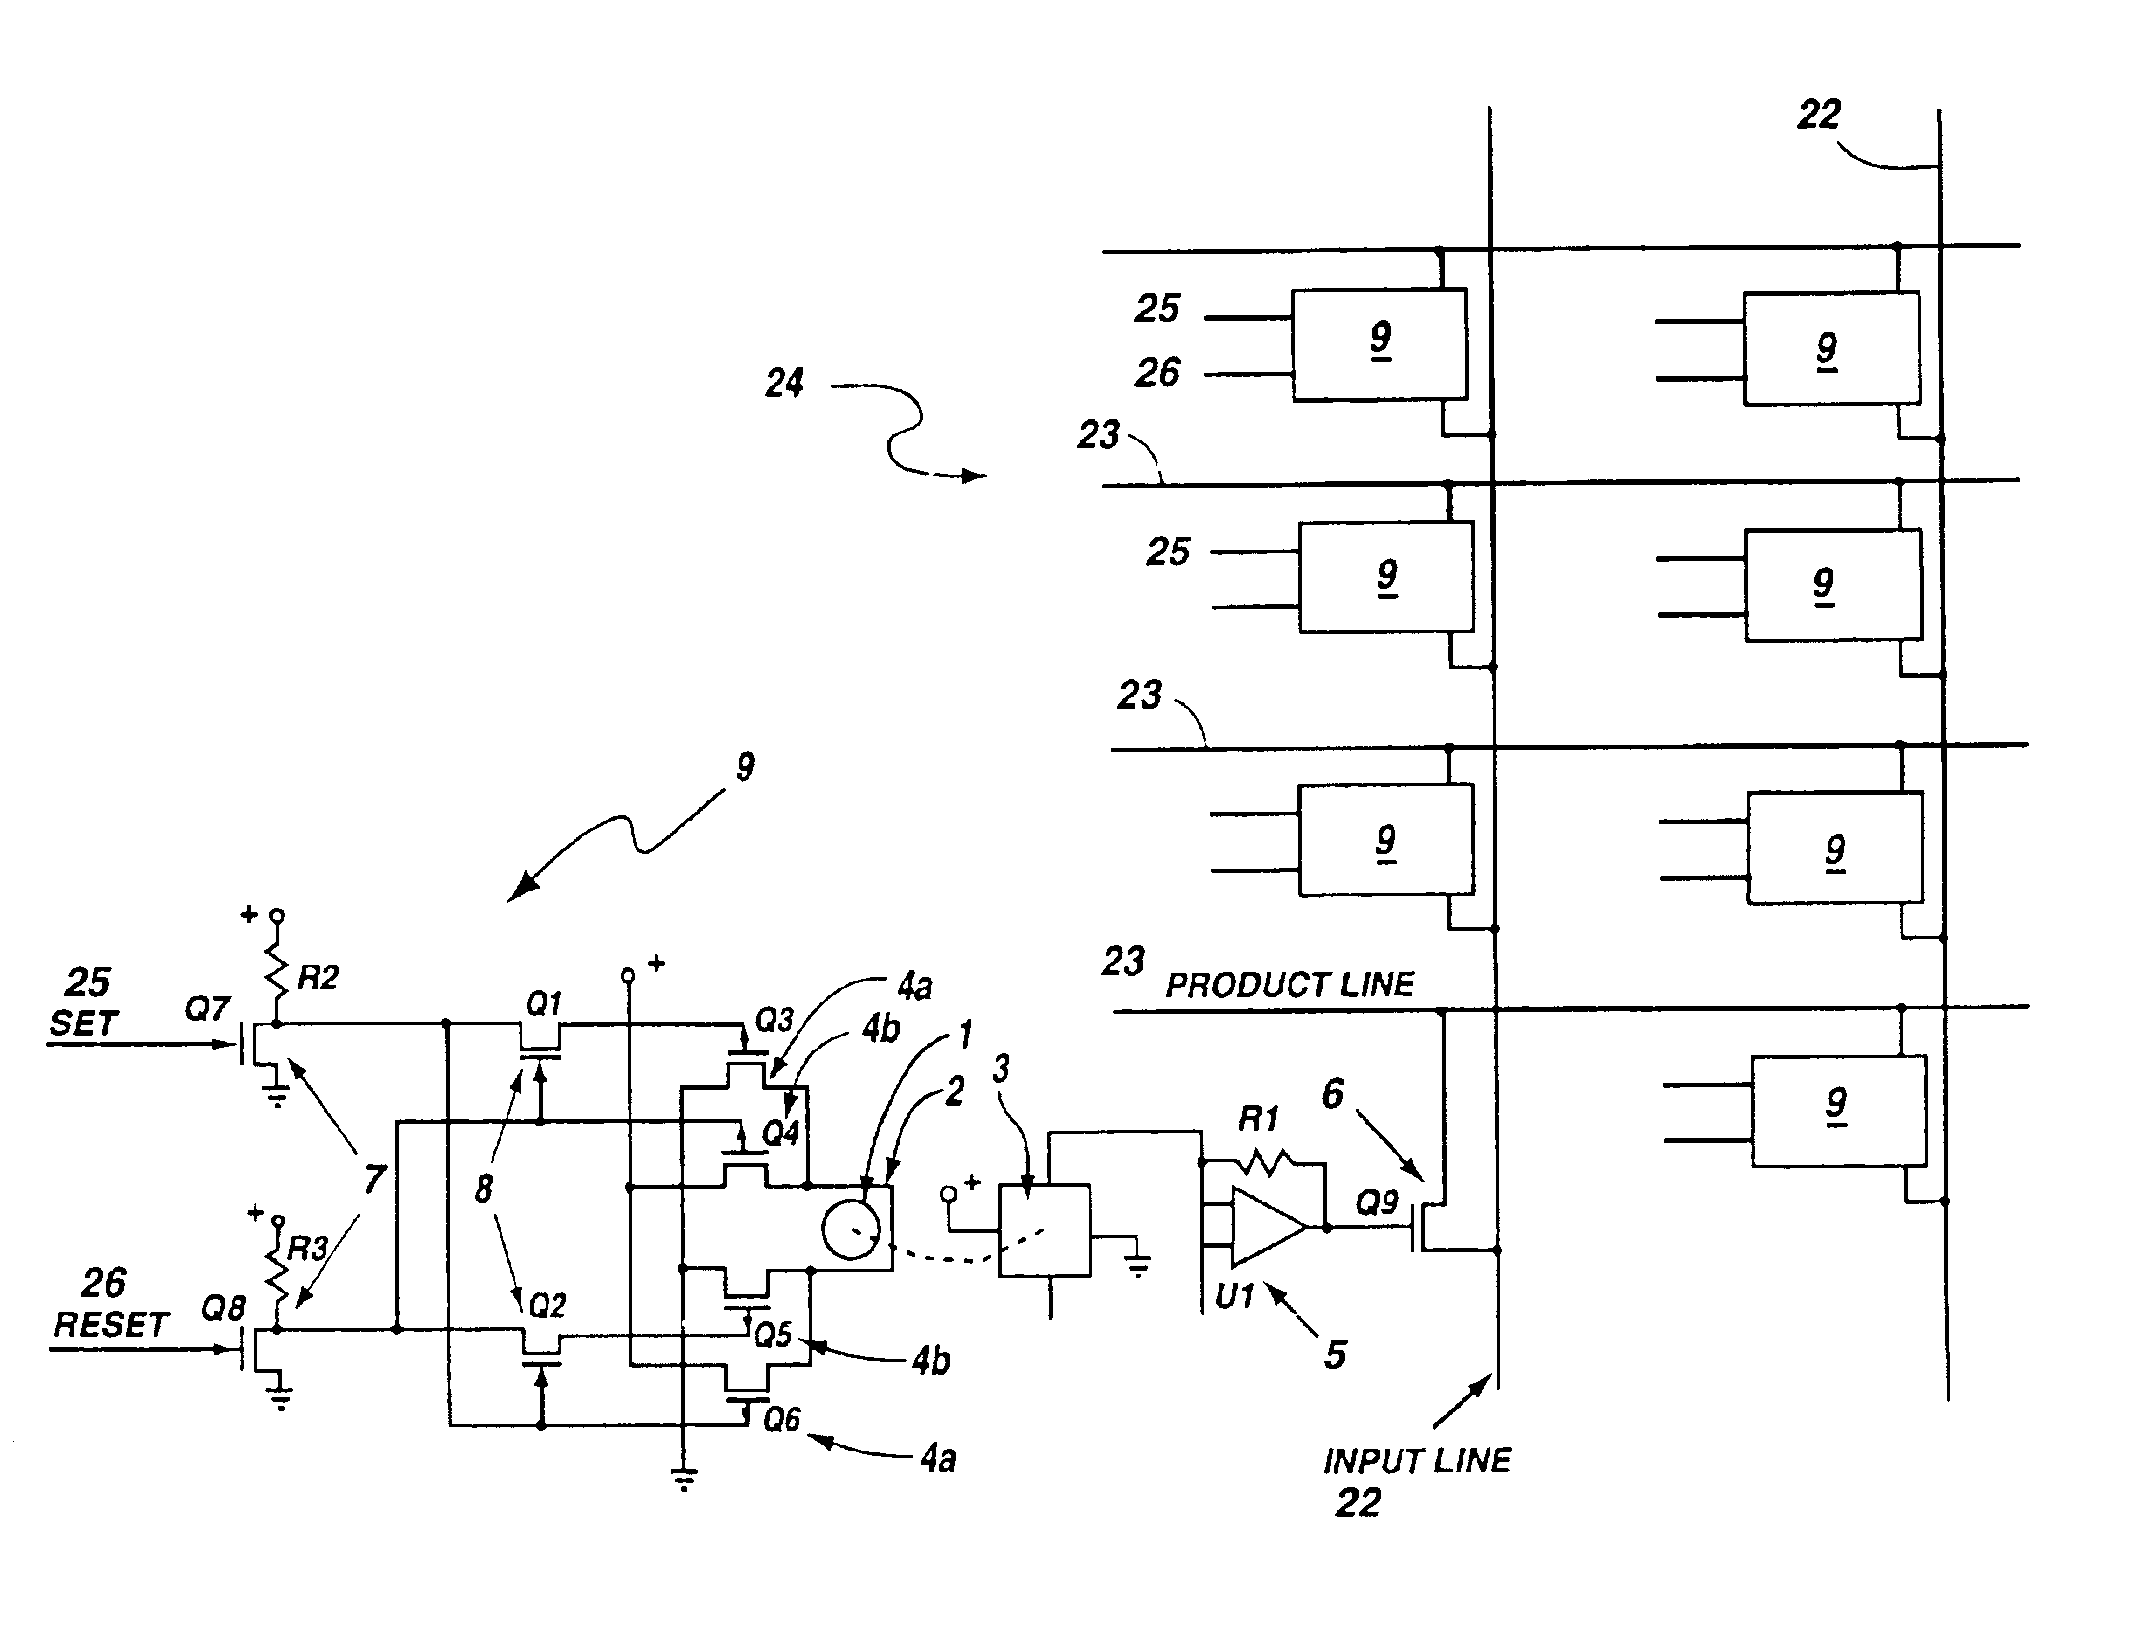 Programmable array logic circuit whose product and input line junctions employ single bit non-volatile ferromagnetic cells